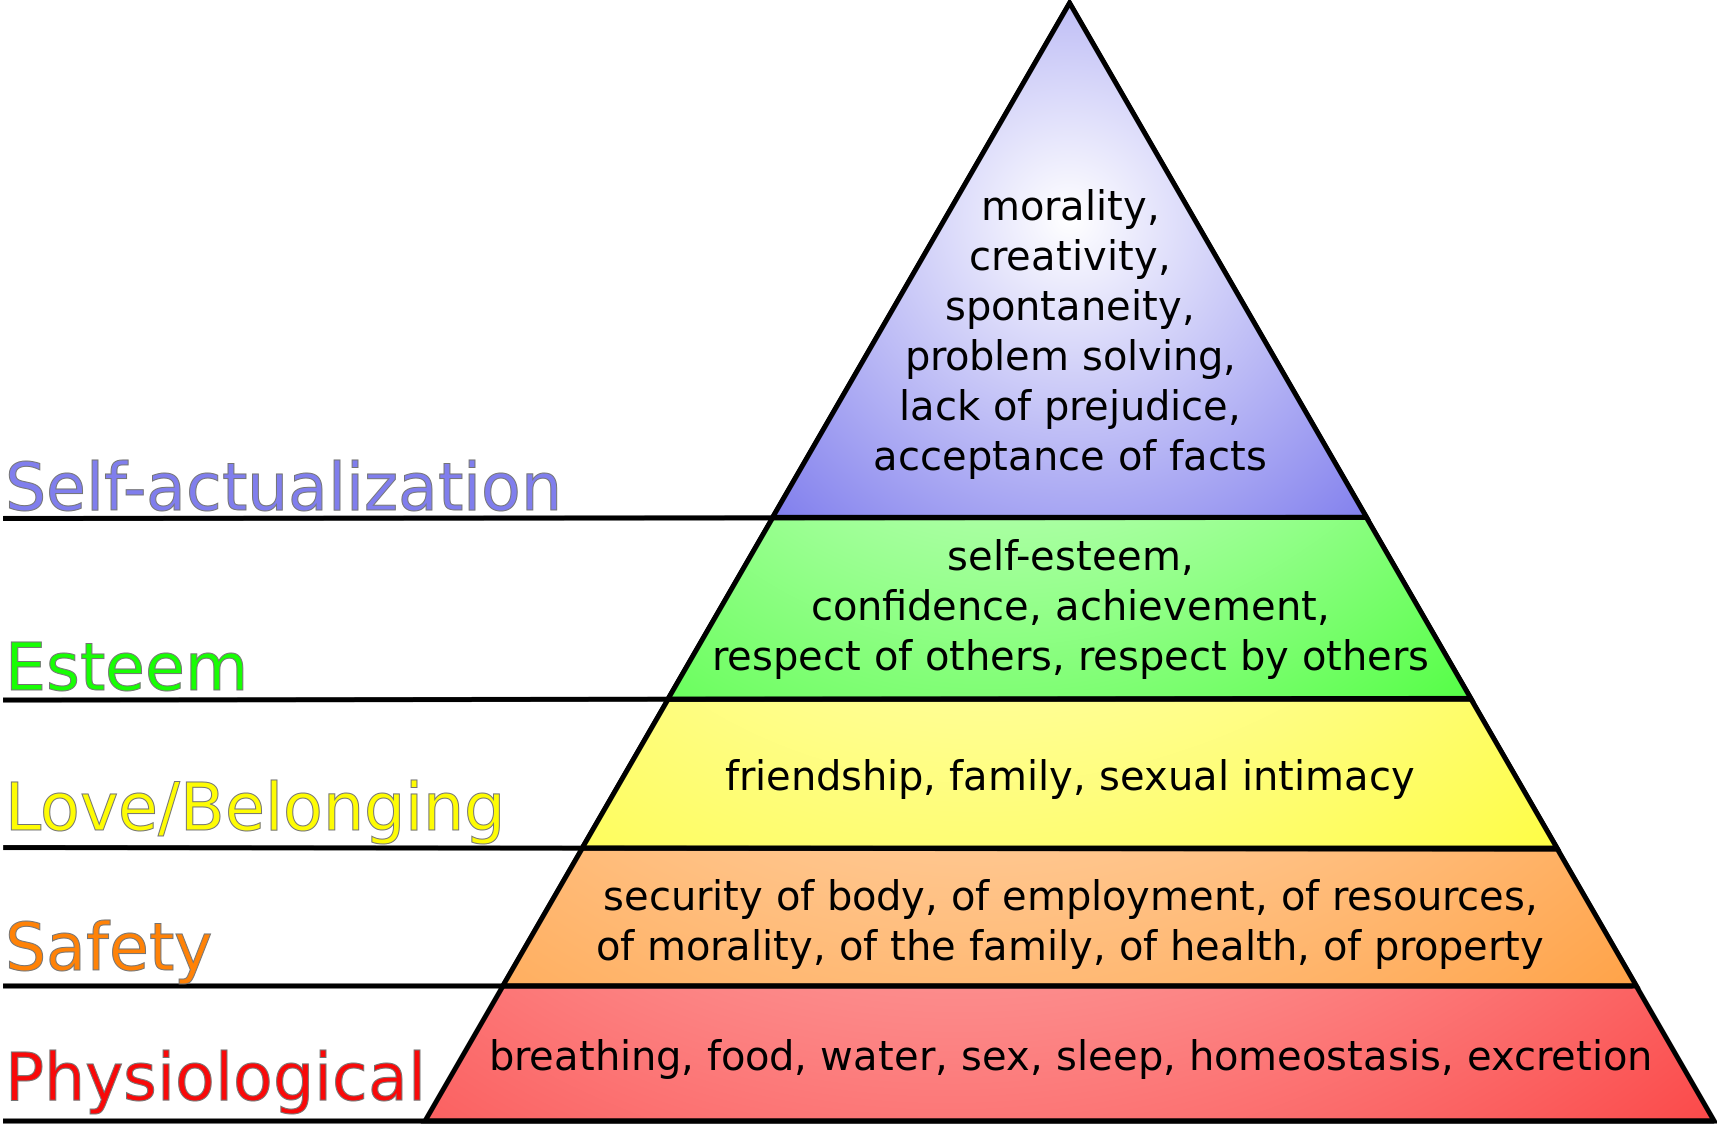 Image showing Maslow's hierarchy of needs, with textual labels